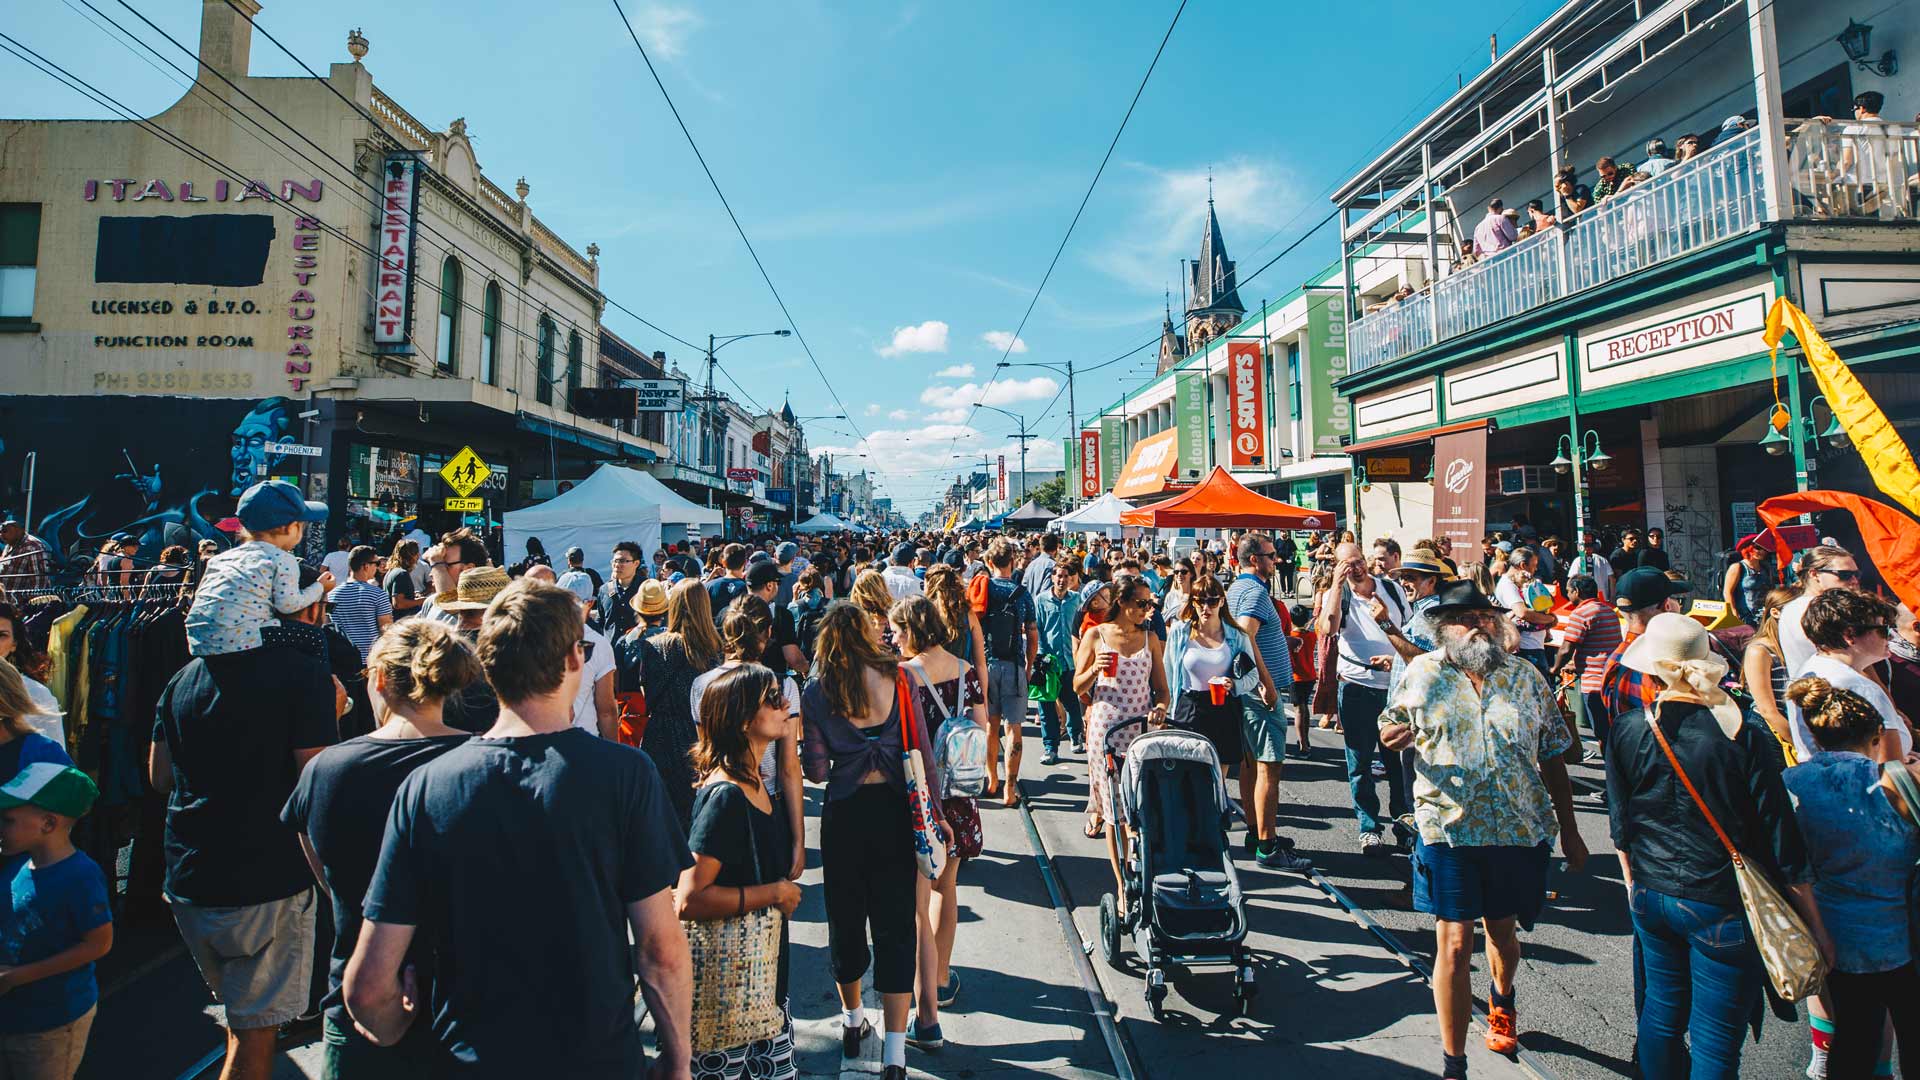 Upcoming Music Festivals Melbourne : Melbourne Summer Festival Guide | The best music festivals in Melbourne and Victoria - Melbourne music festivals take place all through the year, starting from the rainbow serpent and the sugar mountain.